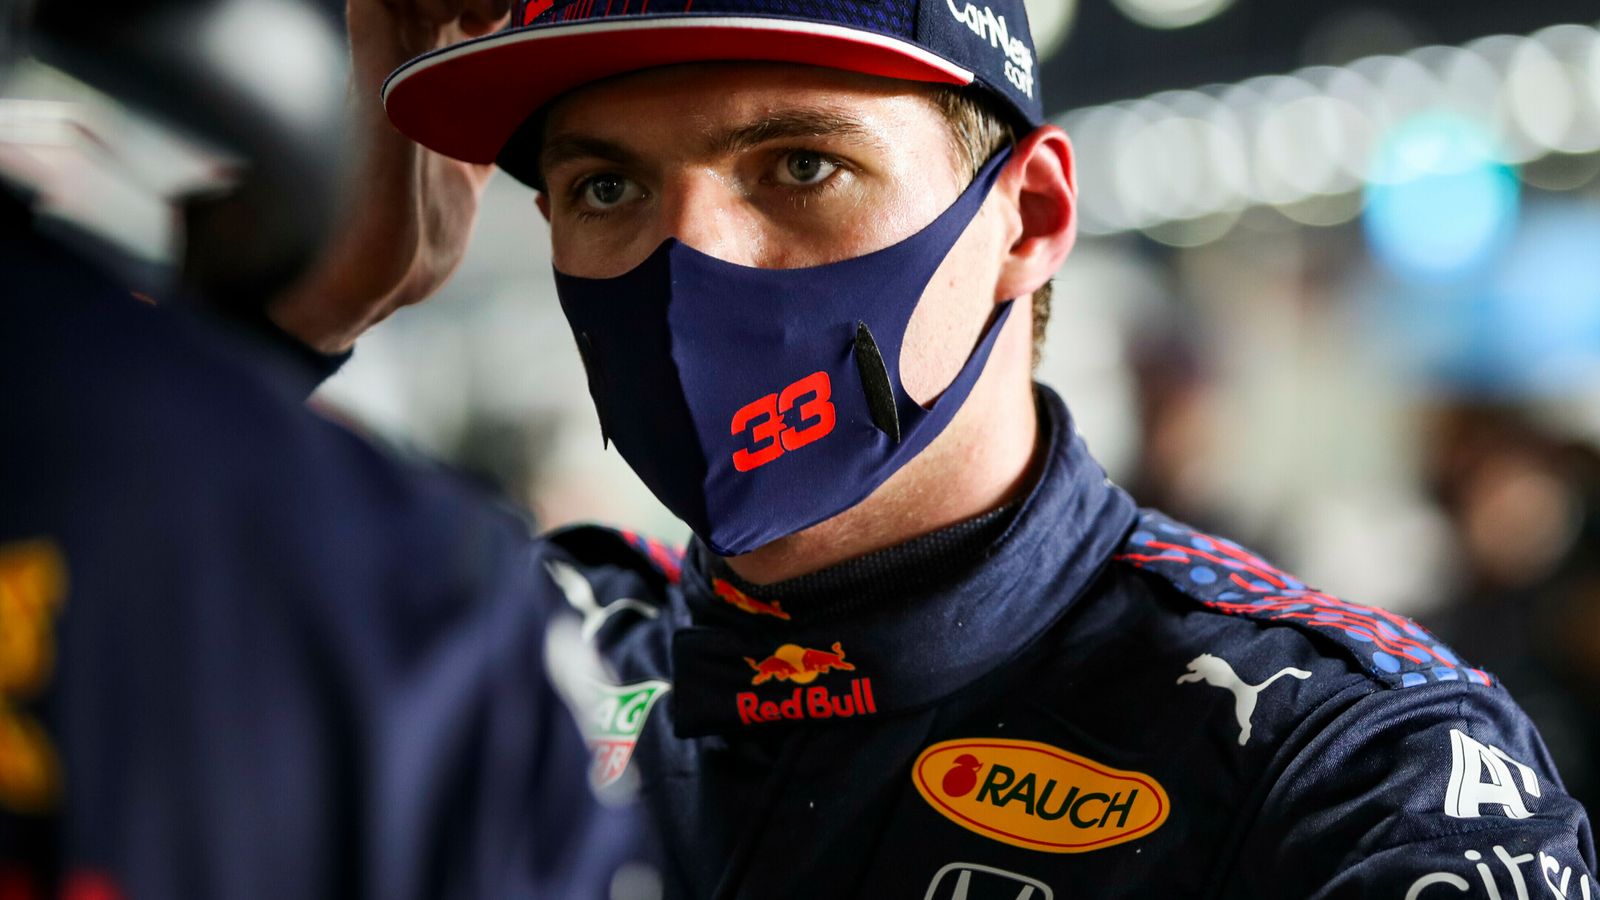 Qatar GP: Max Verstappen handed grid penalty after qualifying breach and drops from second to seventh